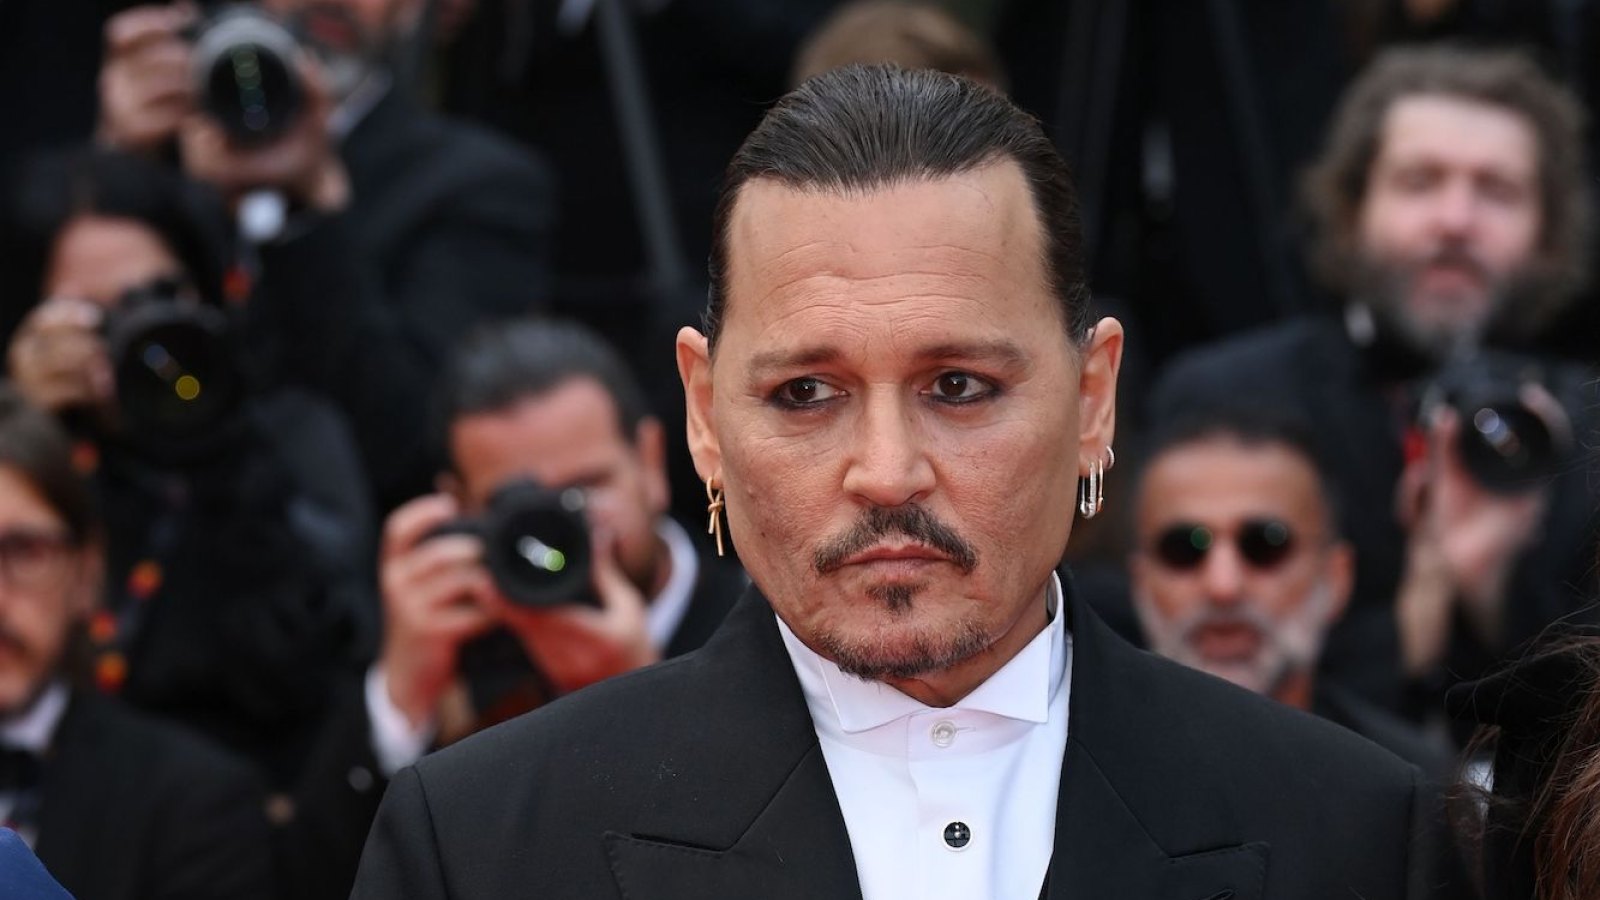 Johnny Depp Gets Emotional After 7-Minute Standing Ovation at Cannes in His 1st Public Appearance Since Amber Heard Legal Battle